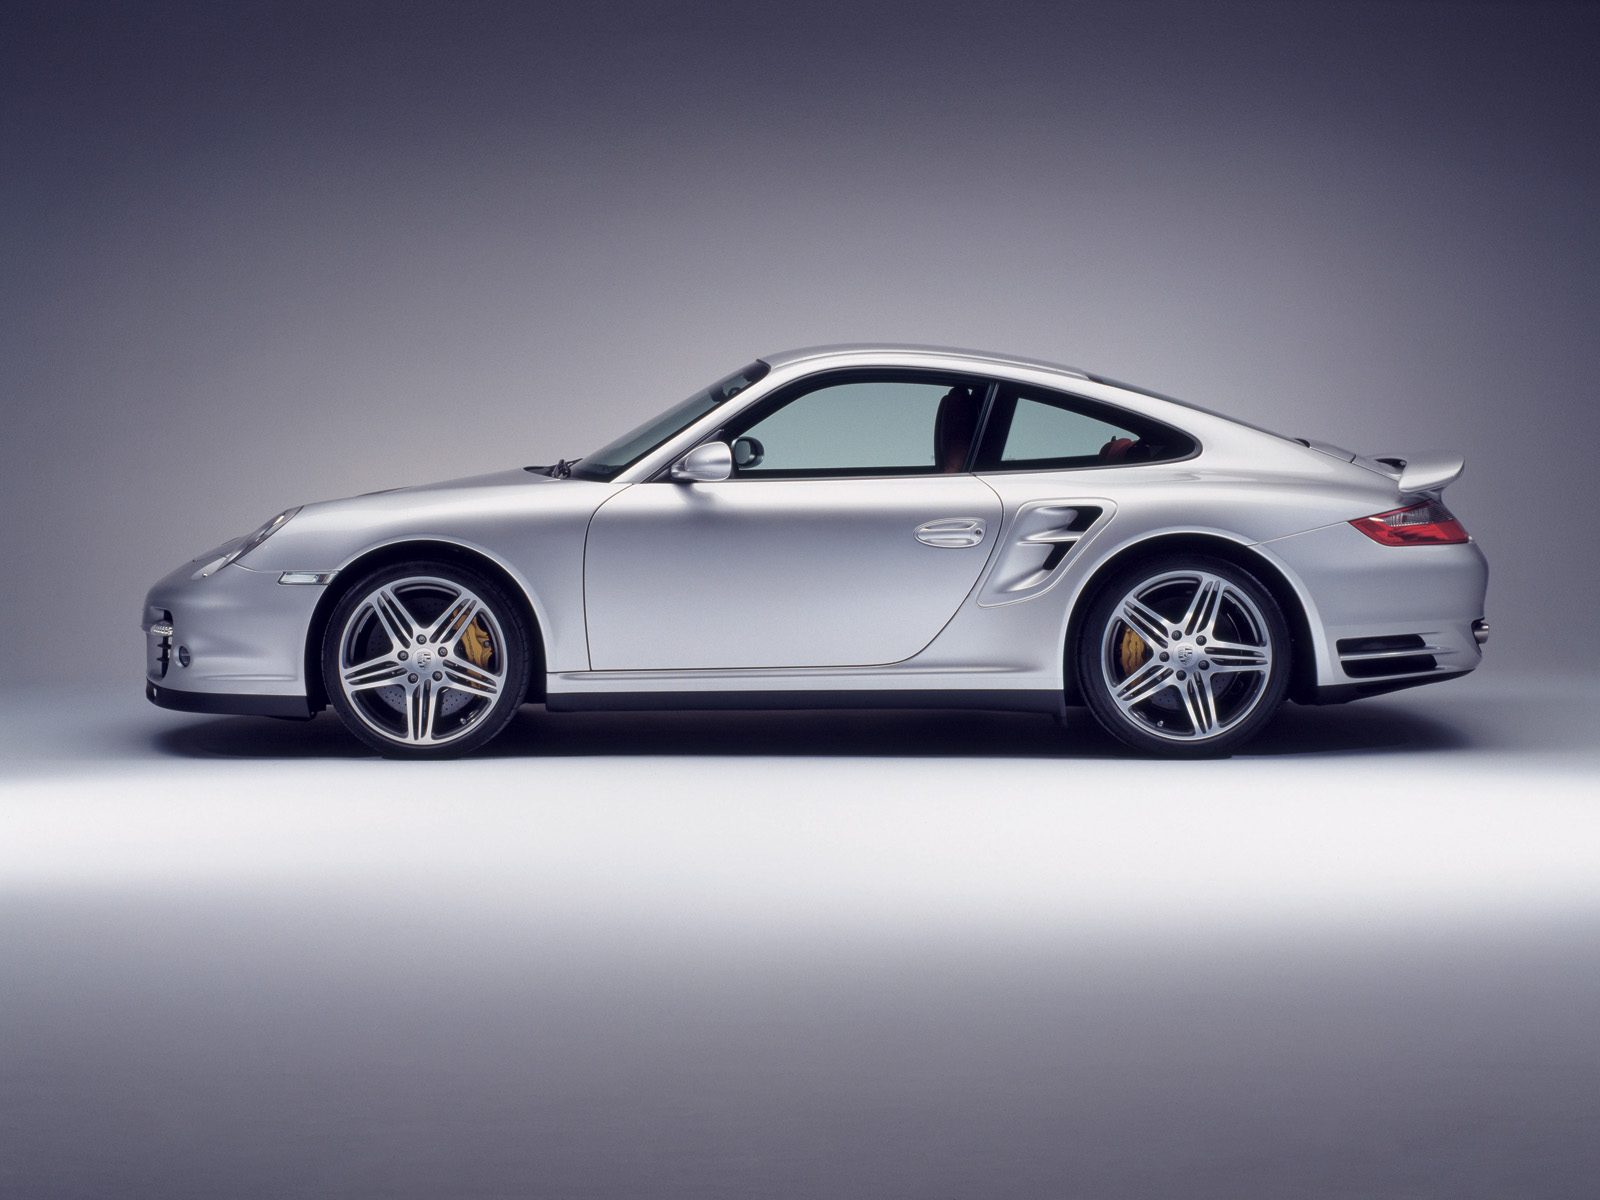 Porsche 997 911 Turbo Cars Wallpapers | Car Pictures | Cars Wallpaper